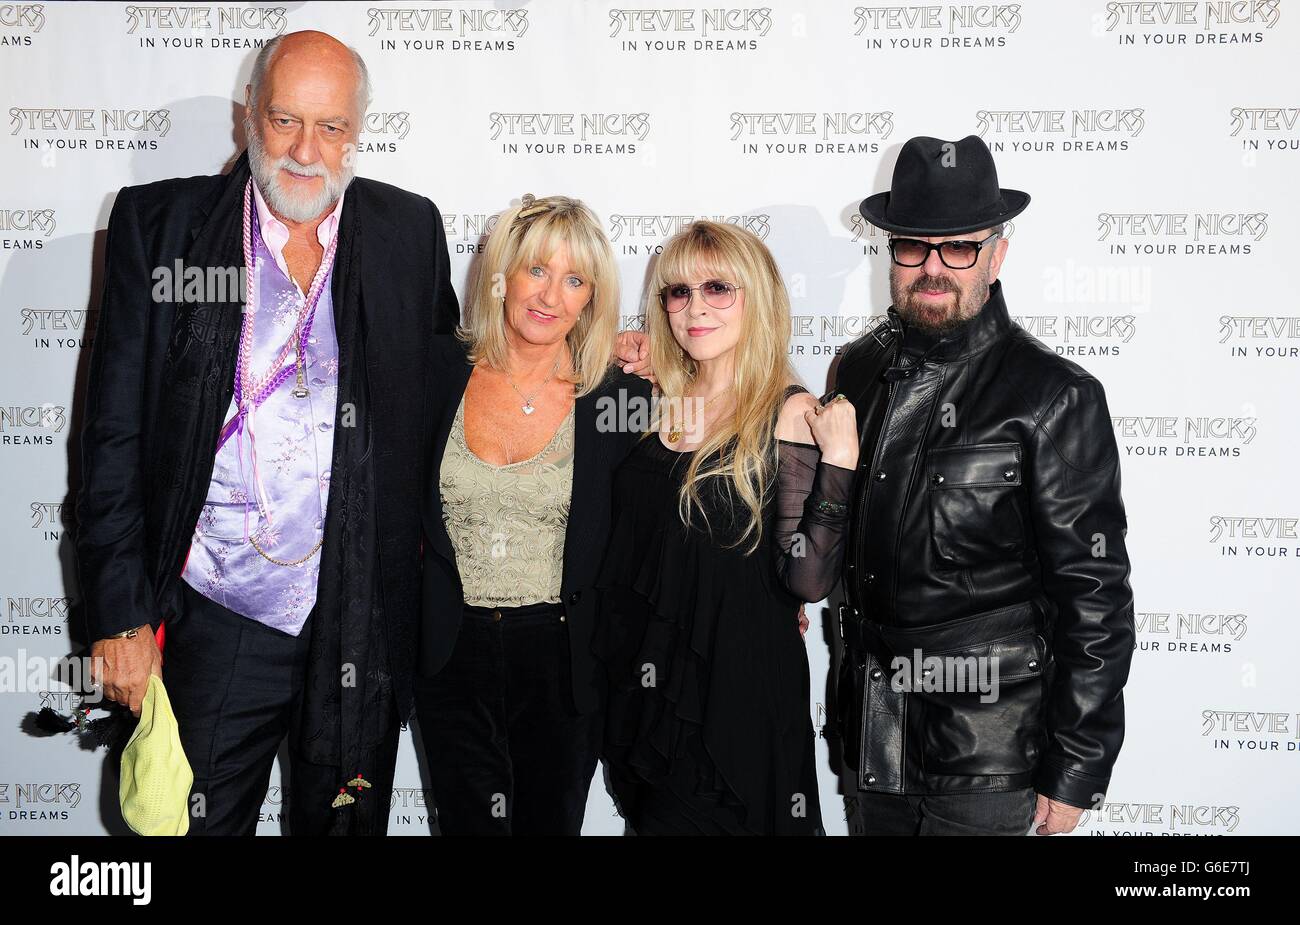 Mick Fleetwood, Christine McVie, Stevie Nicks and Dave Stewart arrive at  the screening of Stevie Nicks In Your Dreams which will be released on DVD  in November, at the Curzon Mayfair in